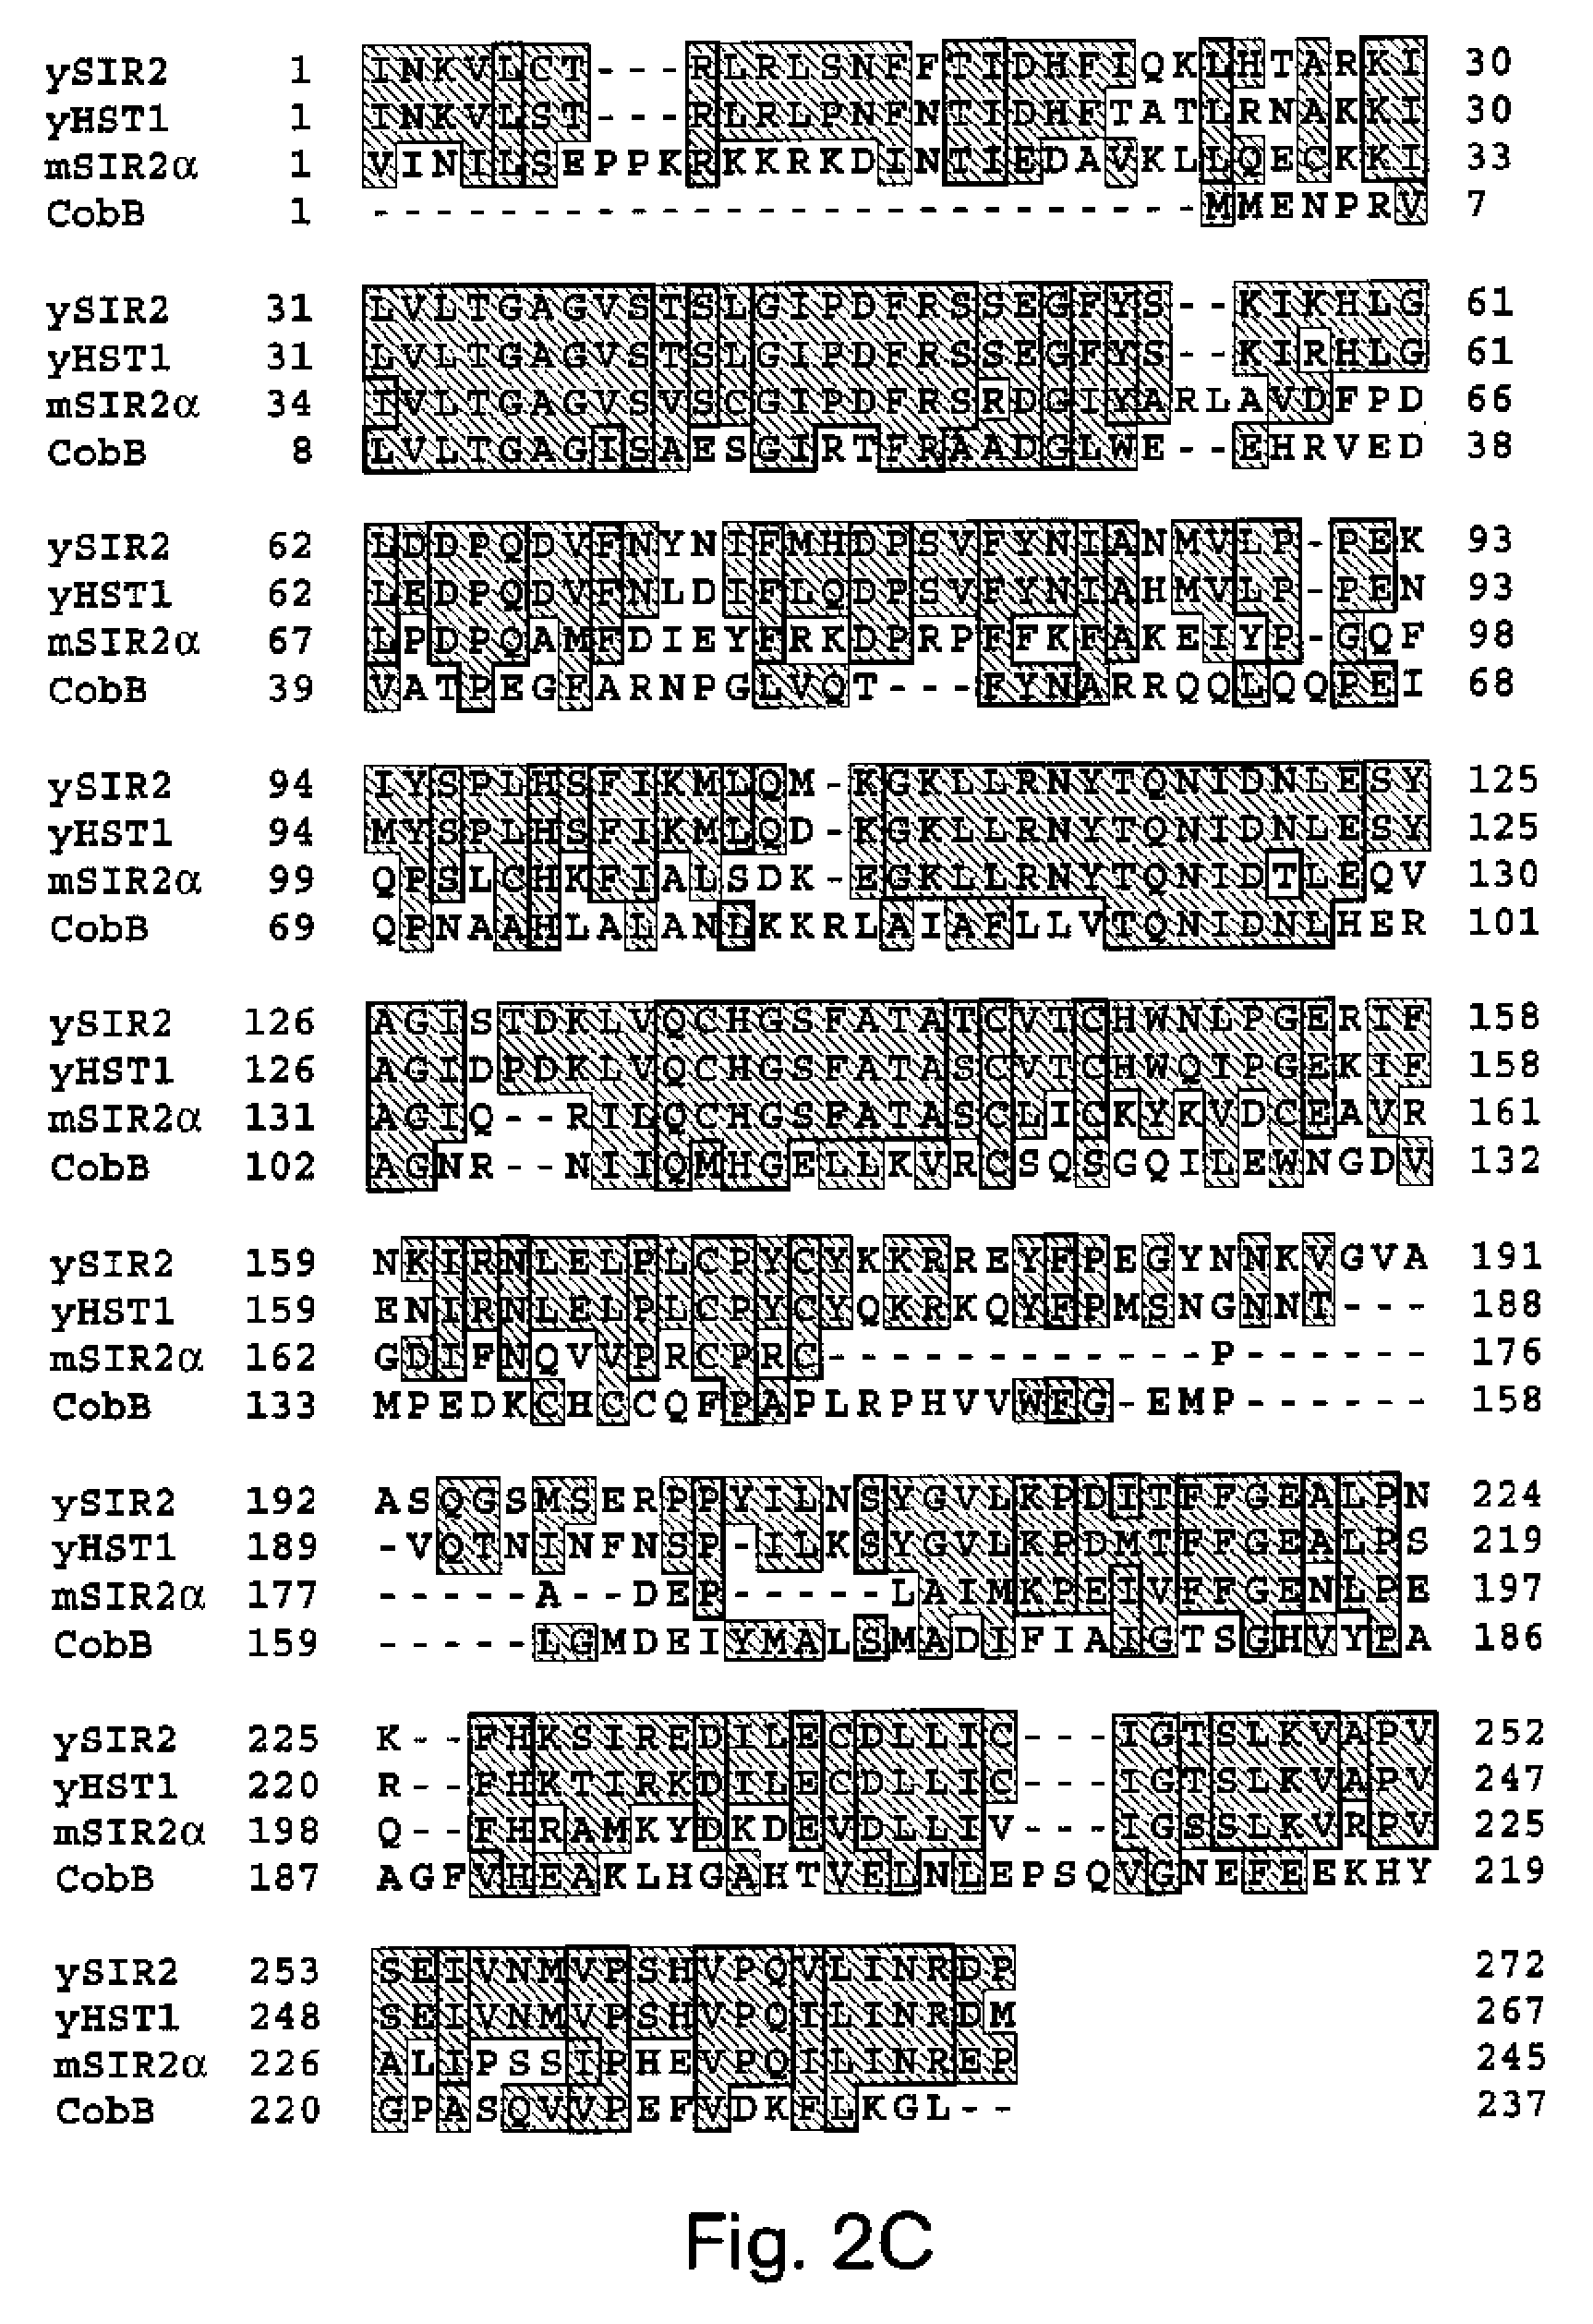 Methods for identifying agents which alter histone protein acetylation, decrease aging, increase lifespan